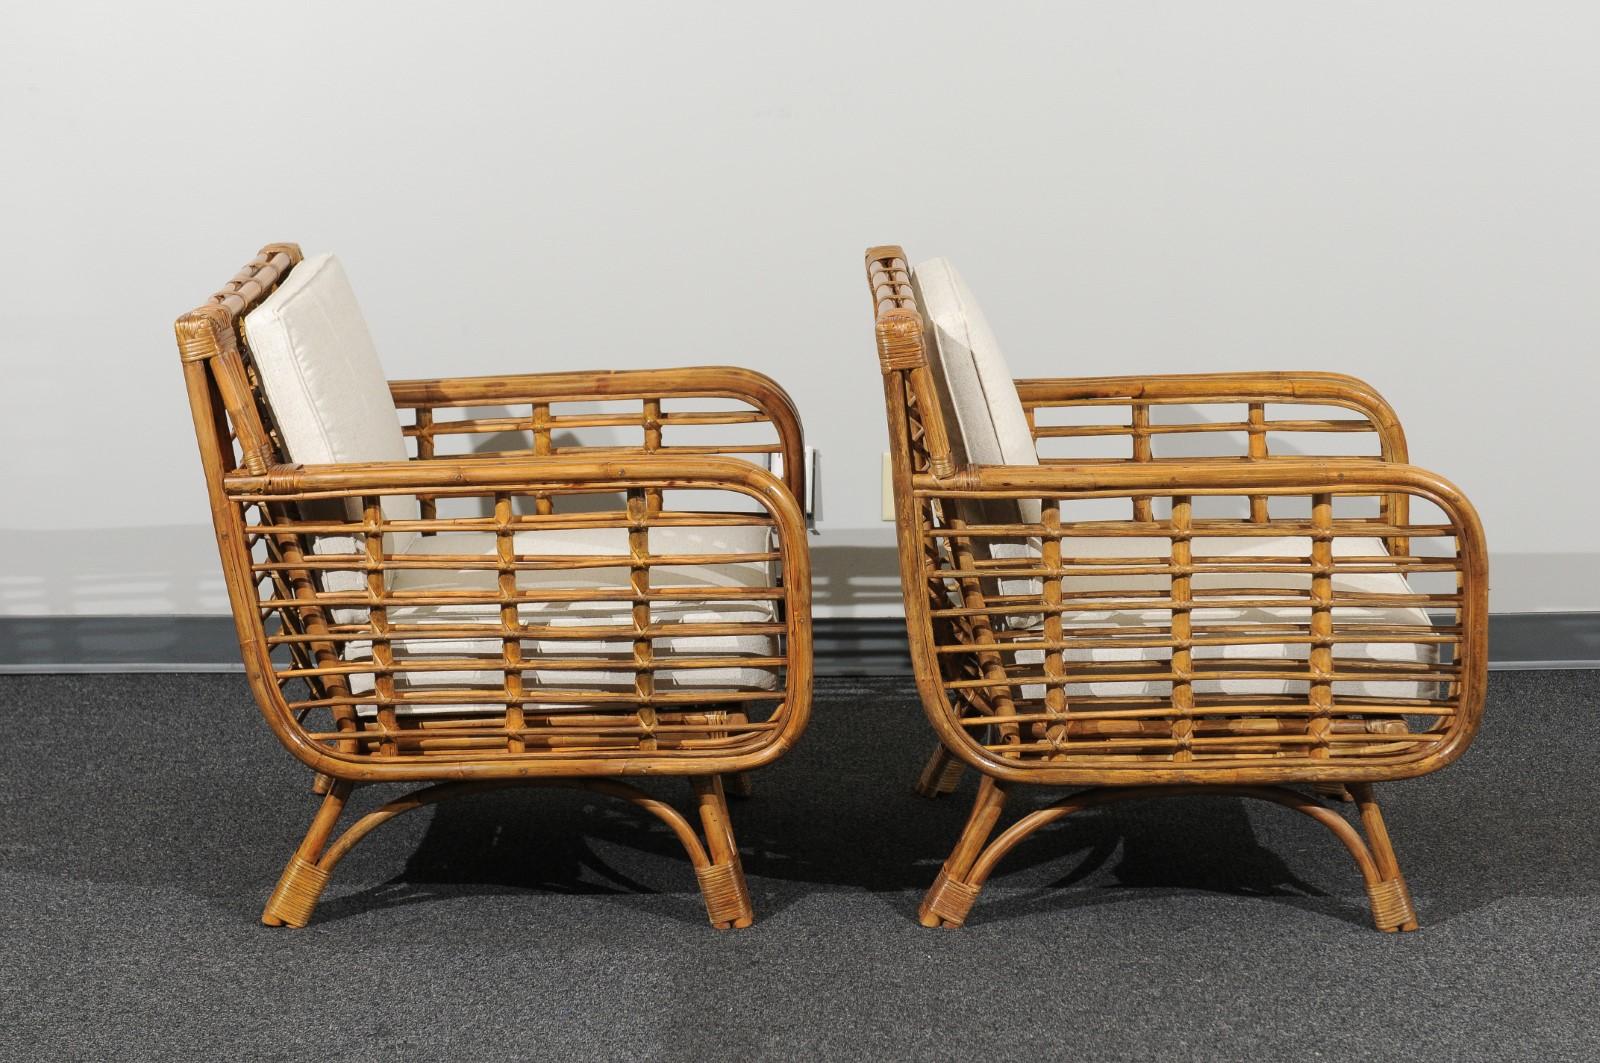 Cane Beautiful Restored Pair of Birdcage Style Rattan Loungers, circa 1955